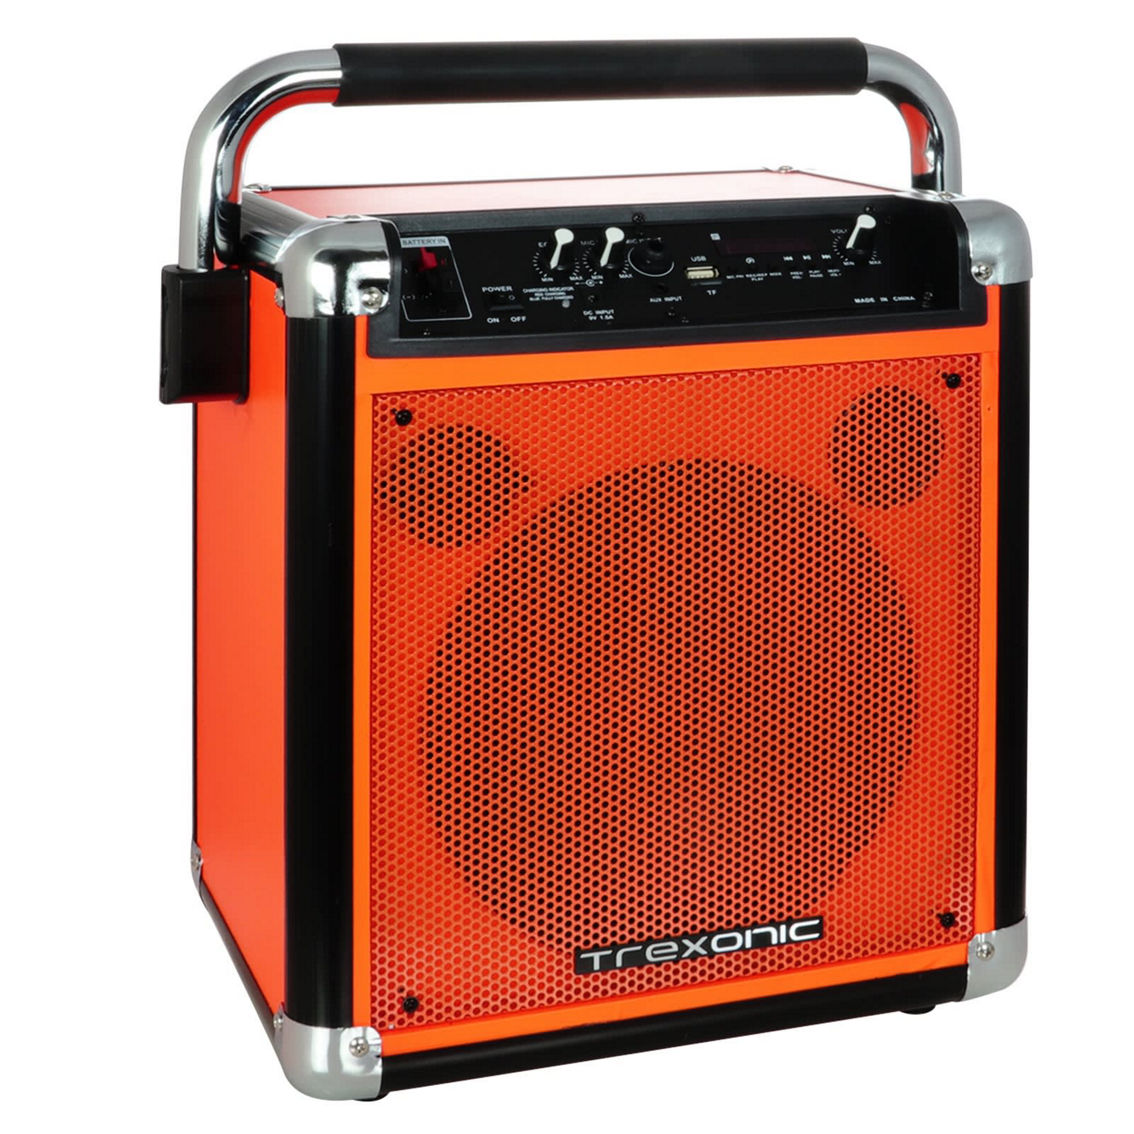 Trexonic Wireless Portable Party Speaker with USB Recording, FM Radio & Micropho - Image 2 of 4